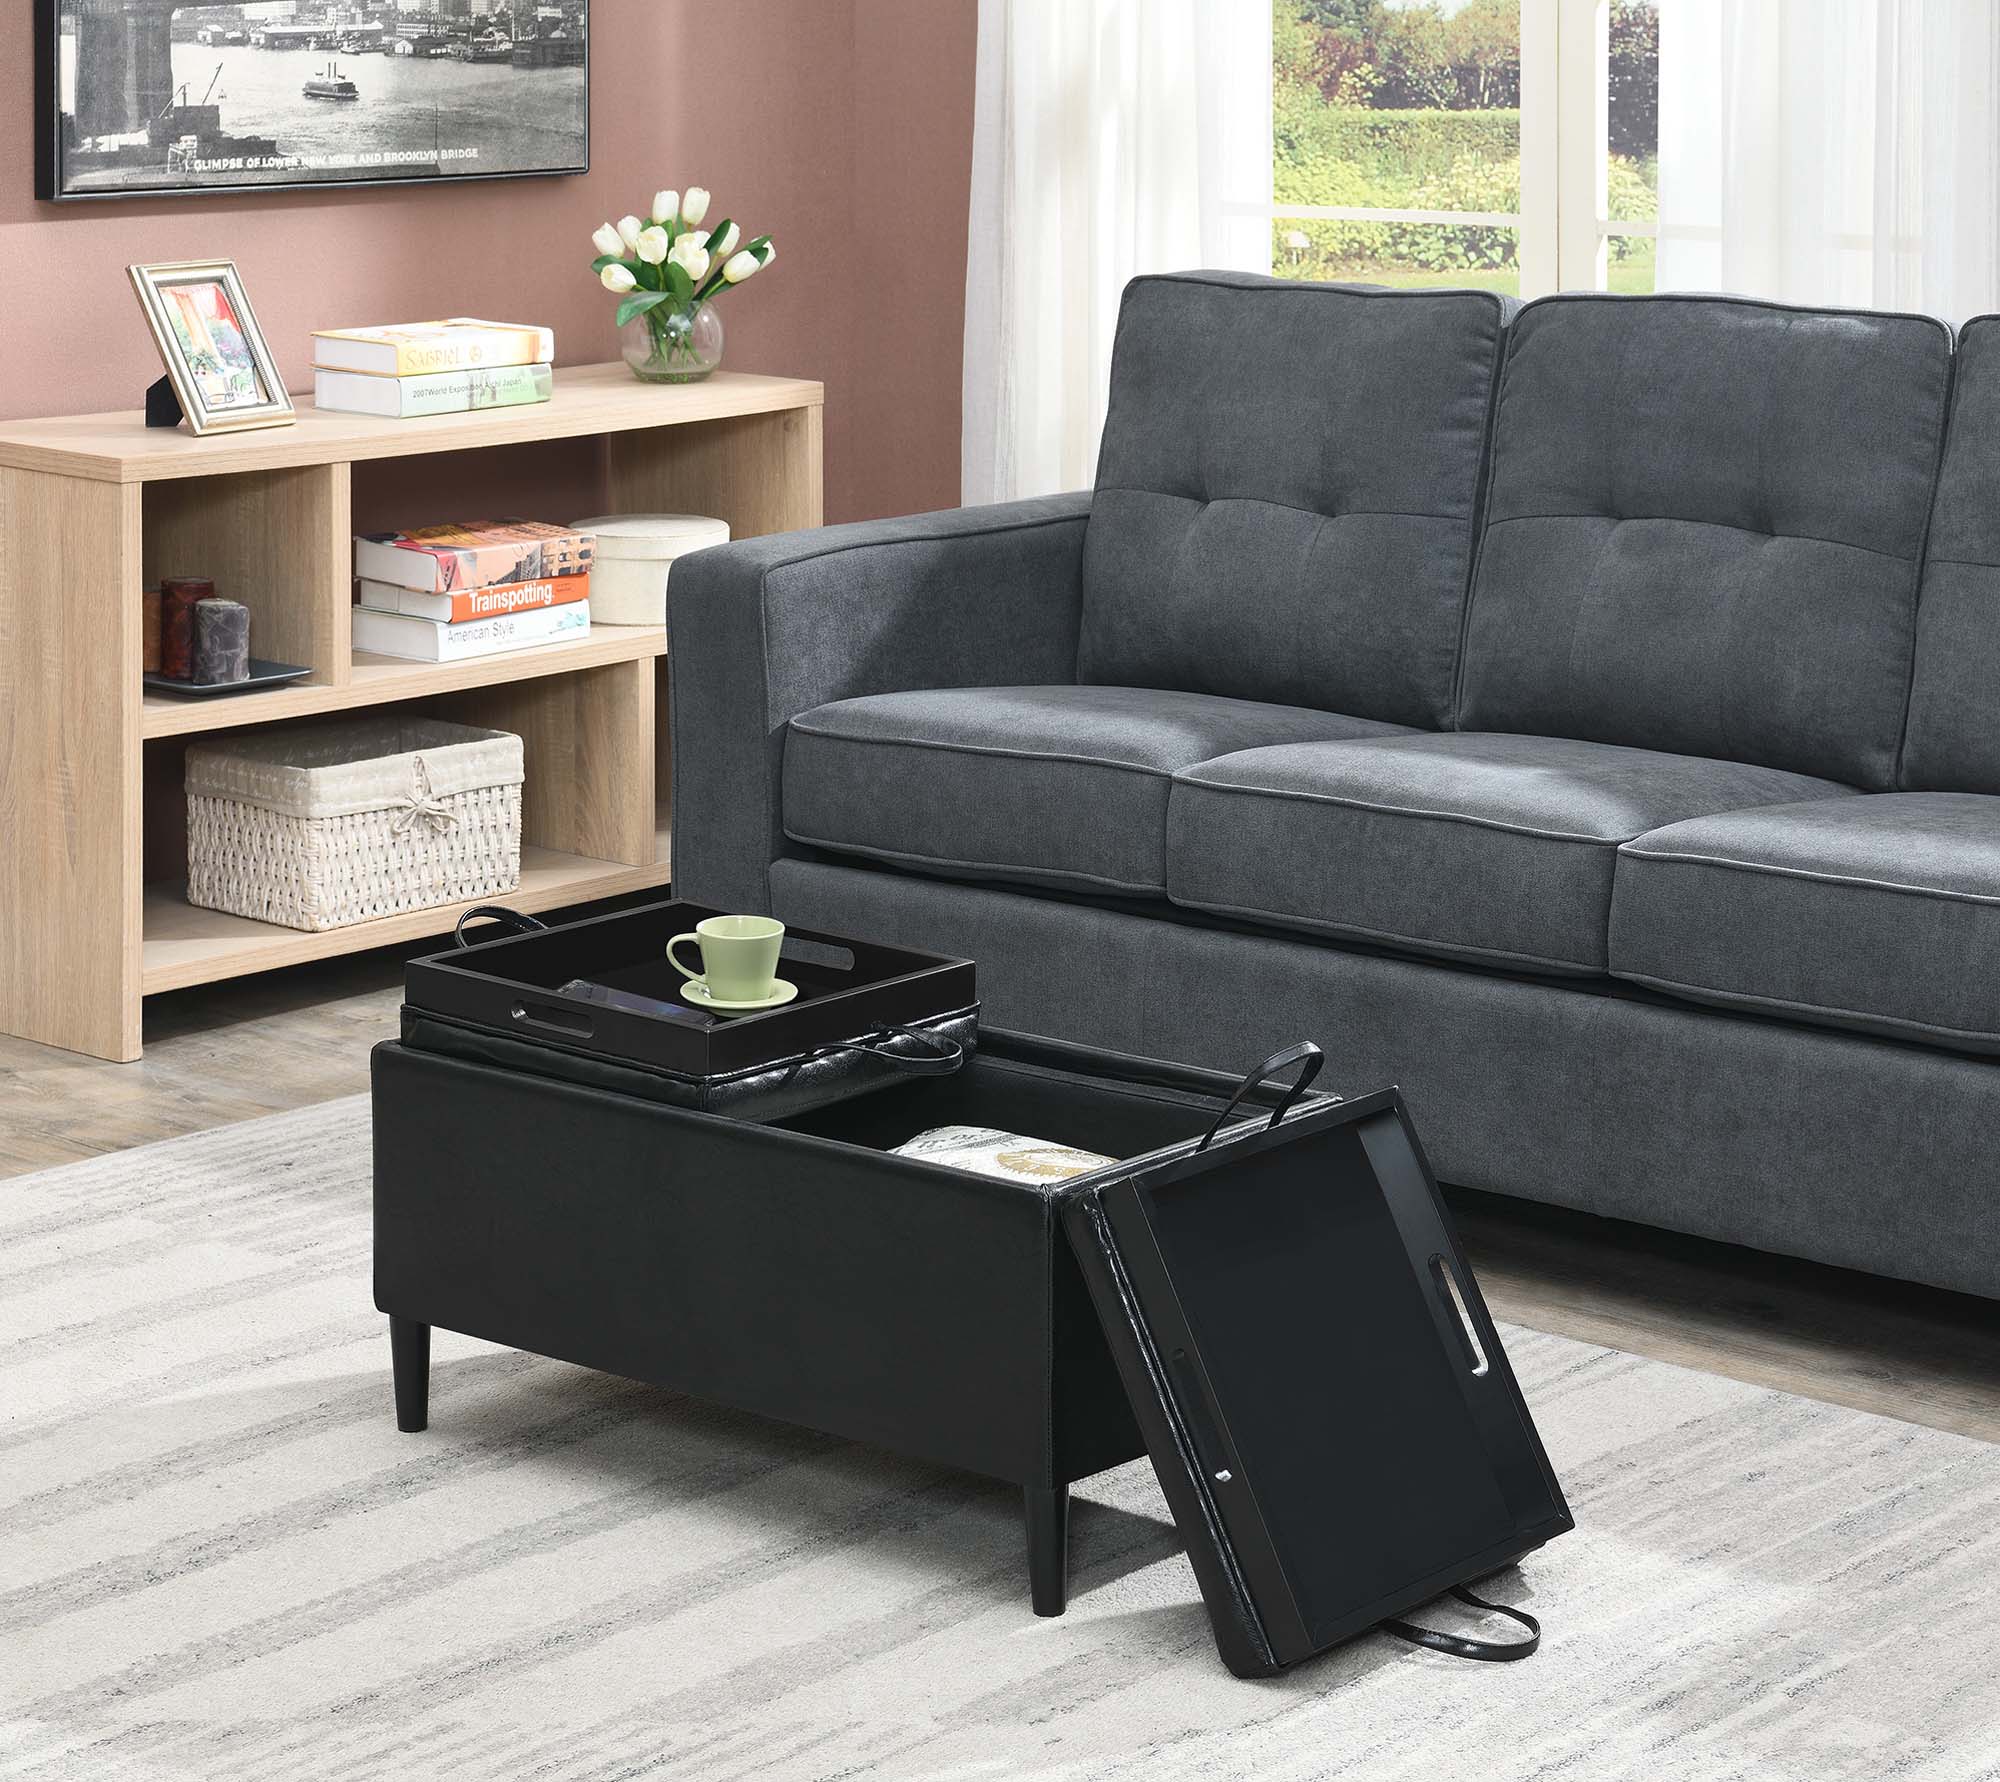 Convenience Concepts Designs4Comfort Magnolia Storage Ottoman with Reversible Trays, Black Faux Leather - image 1 of 4